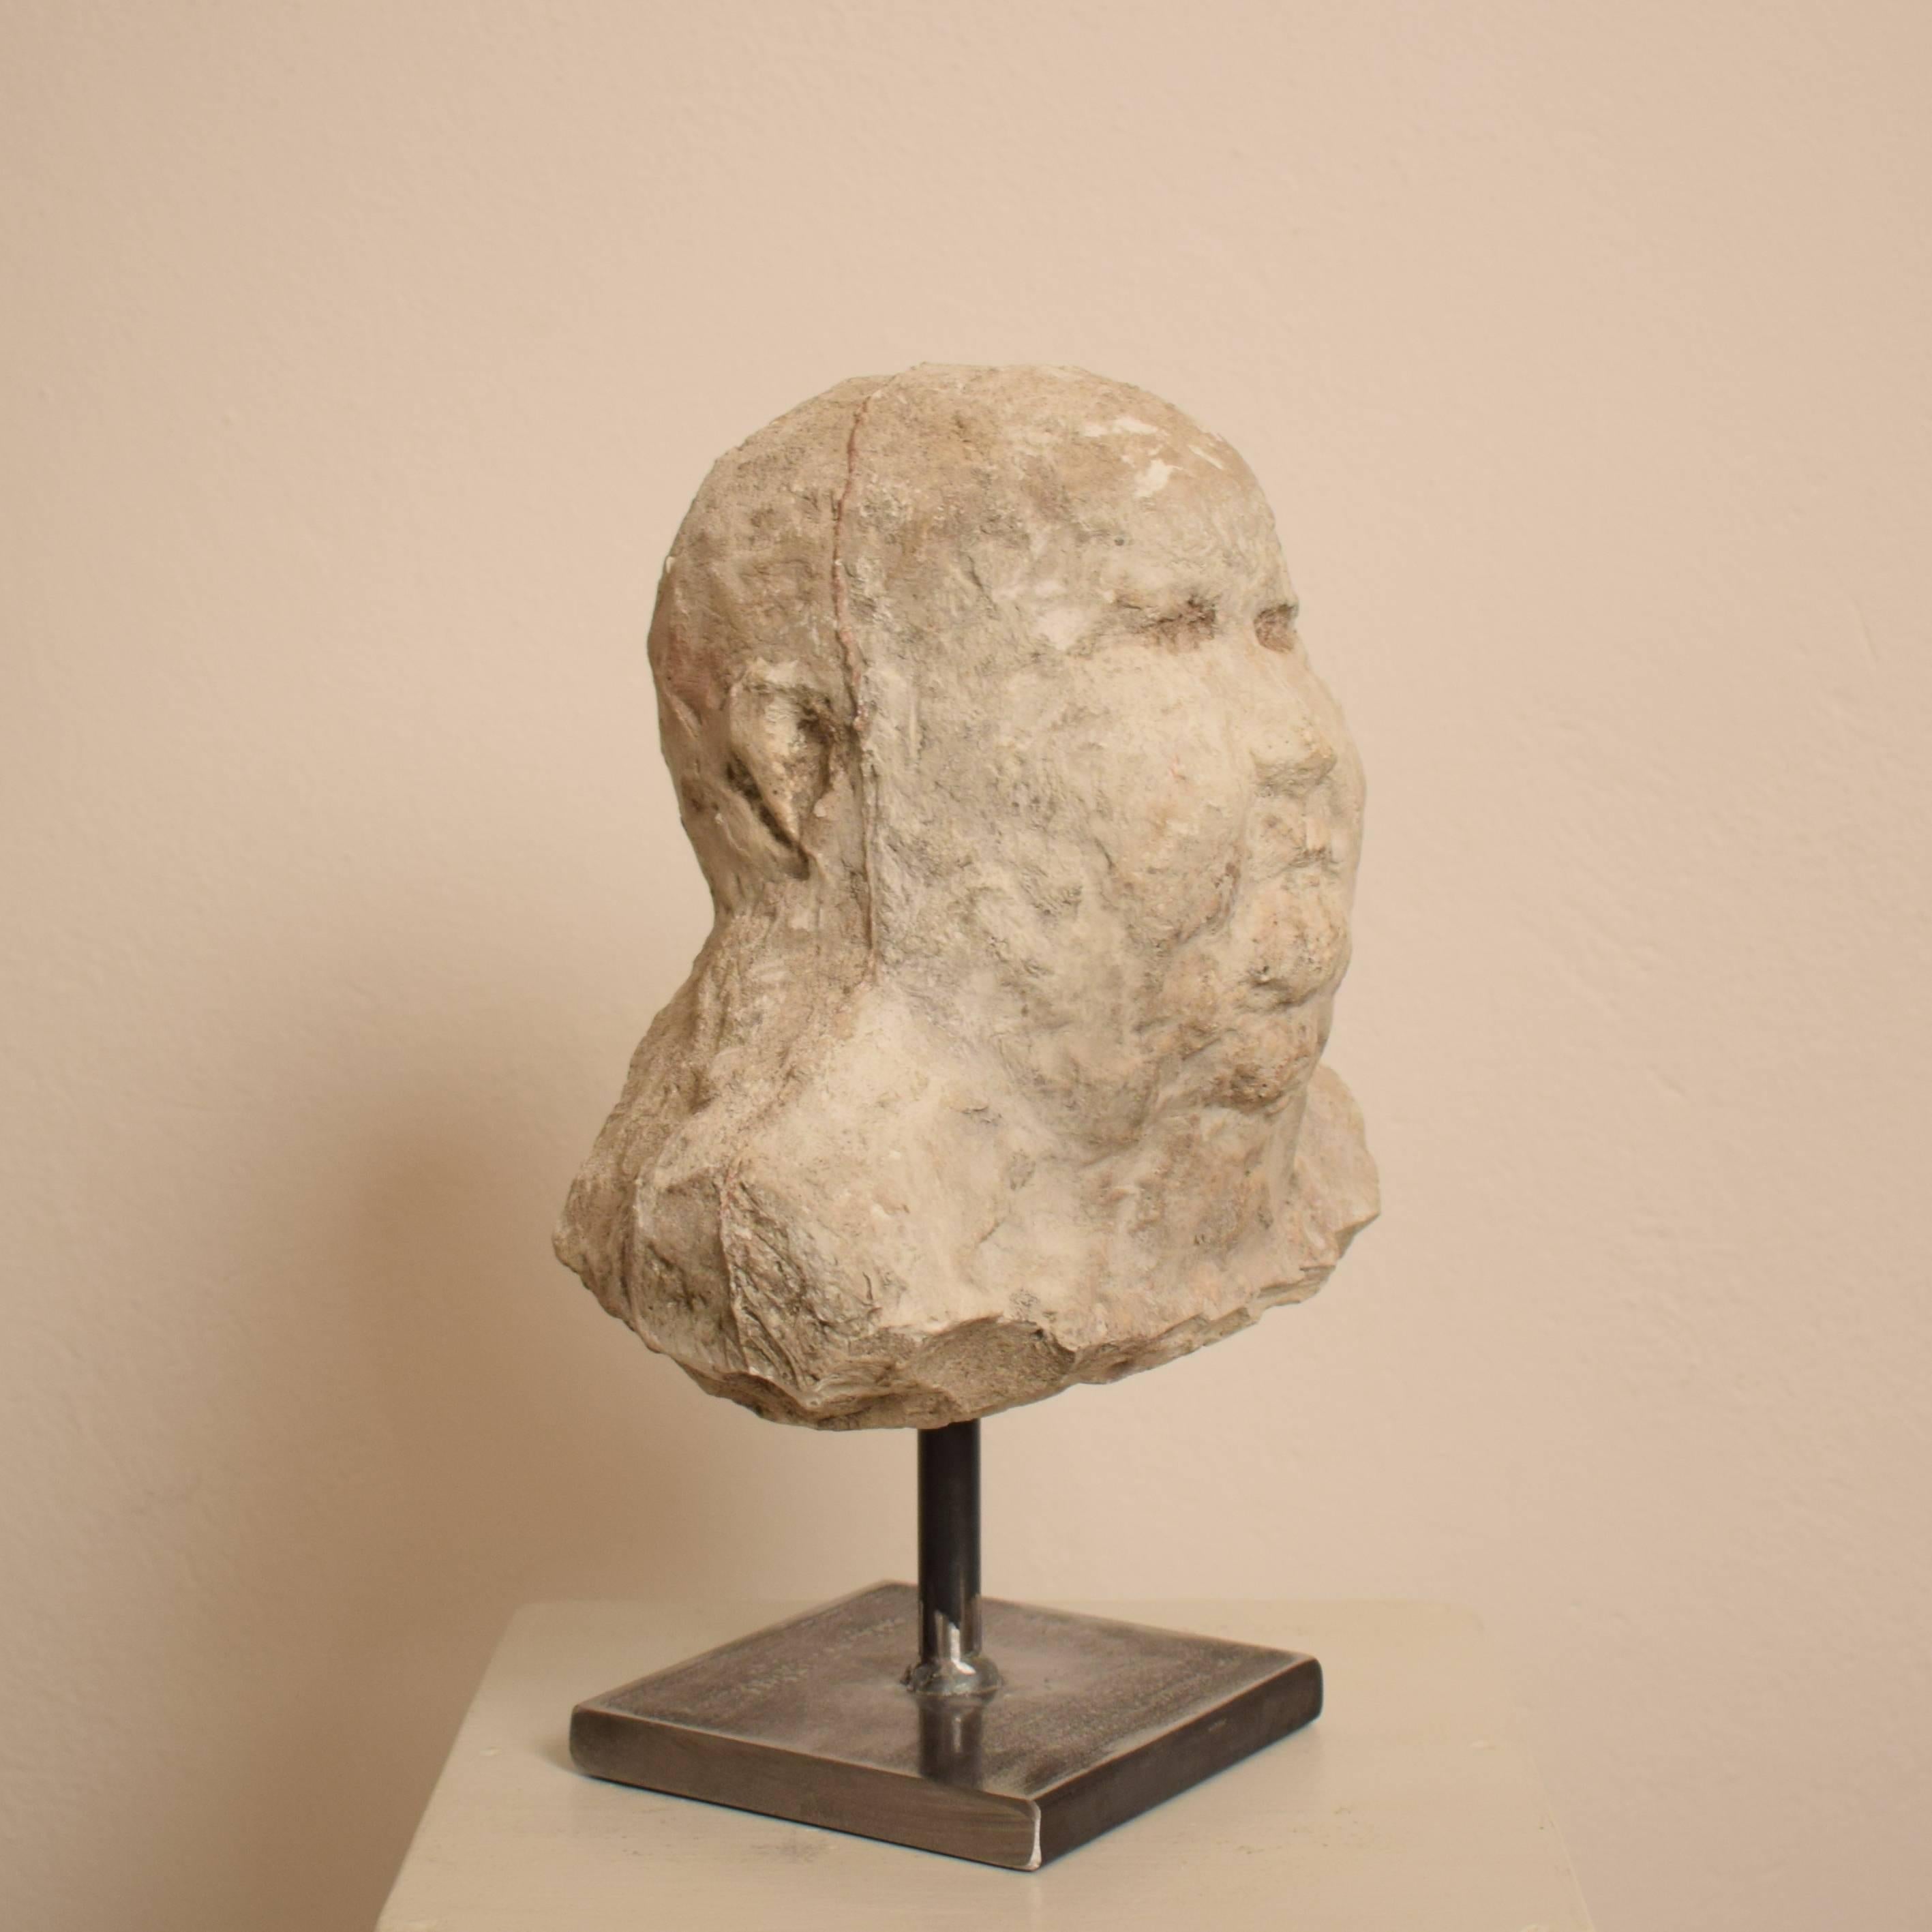 This plaster bust of was made in the early 20th century. It was probably made by Karl Koch in 1920.